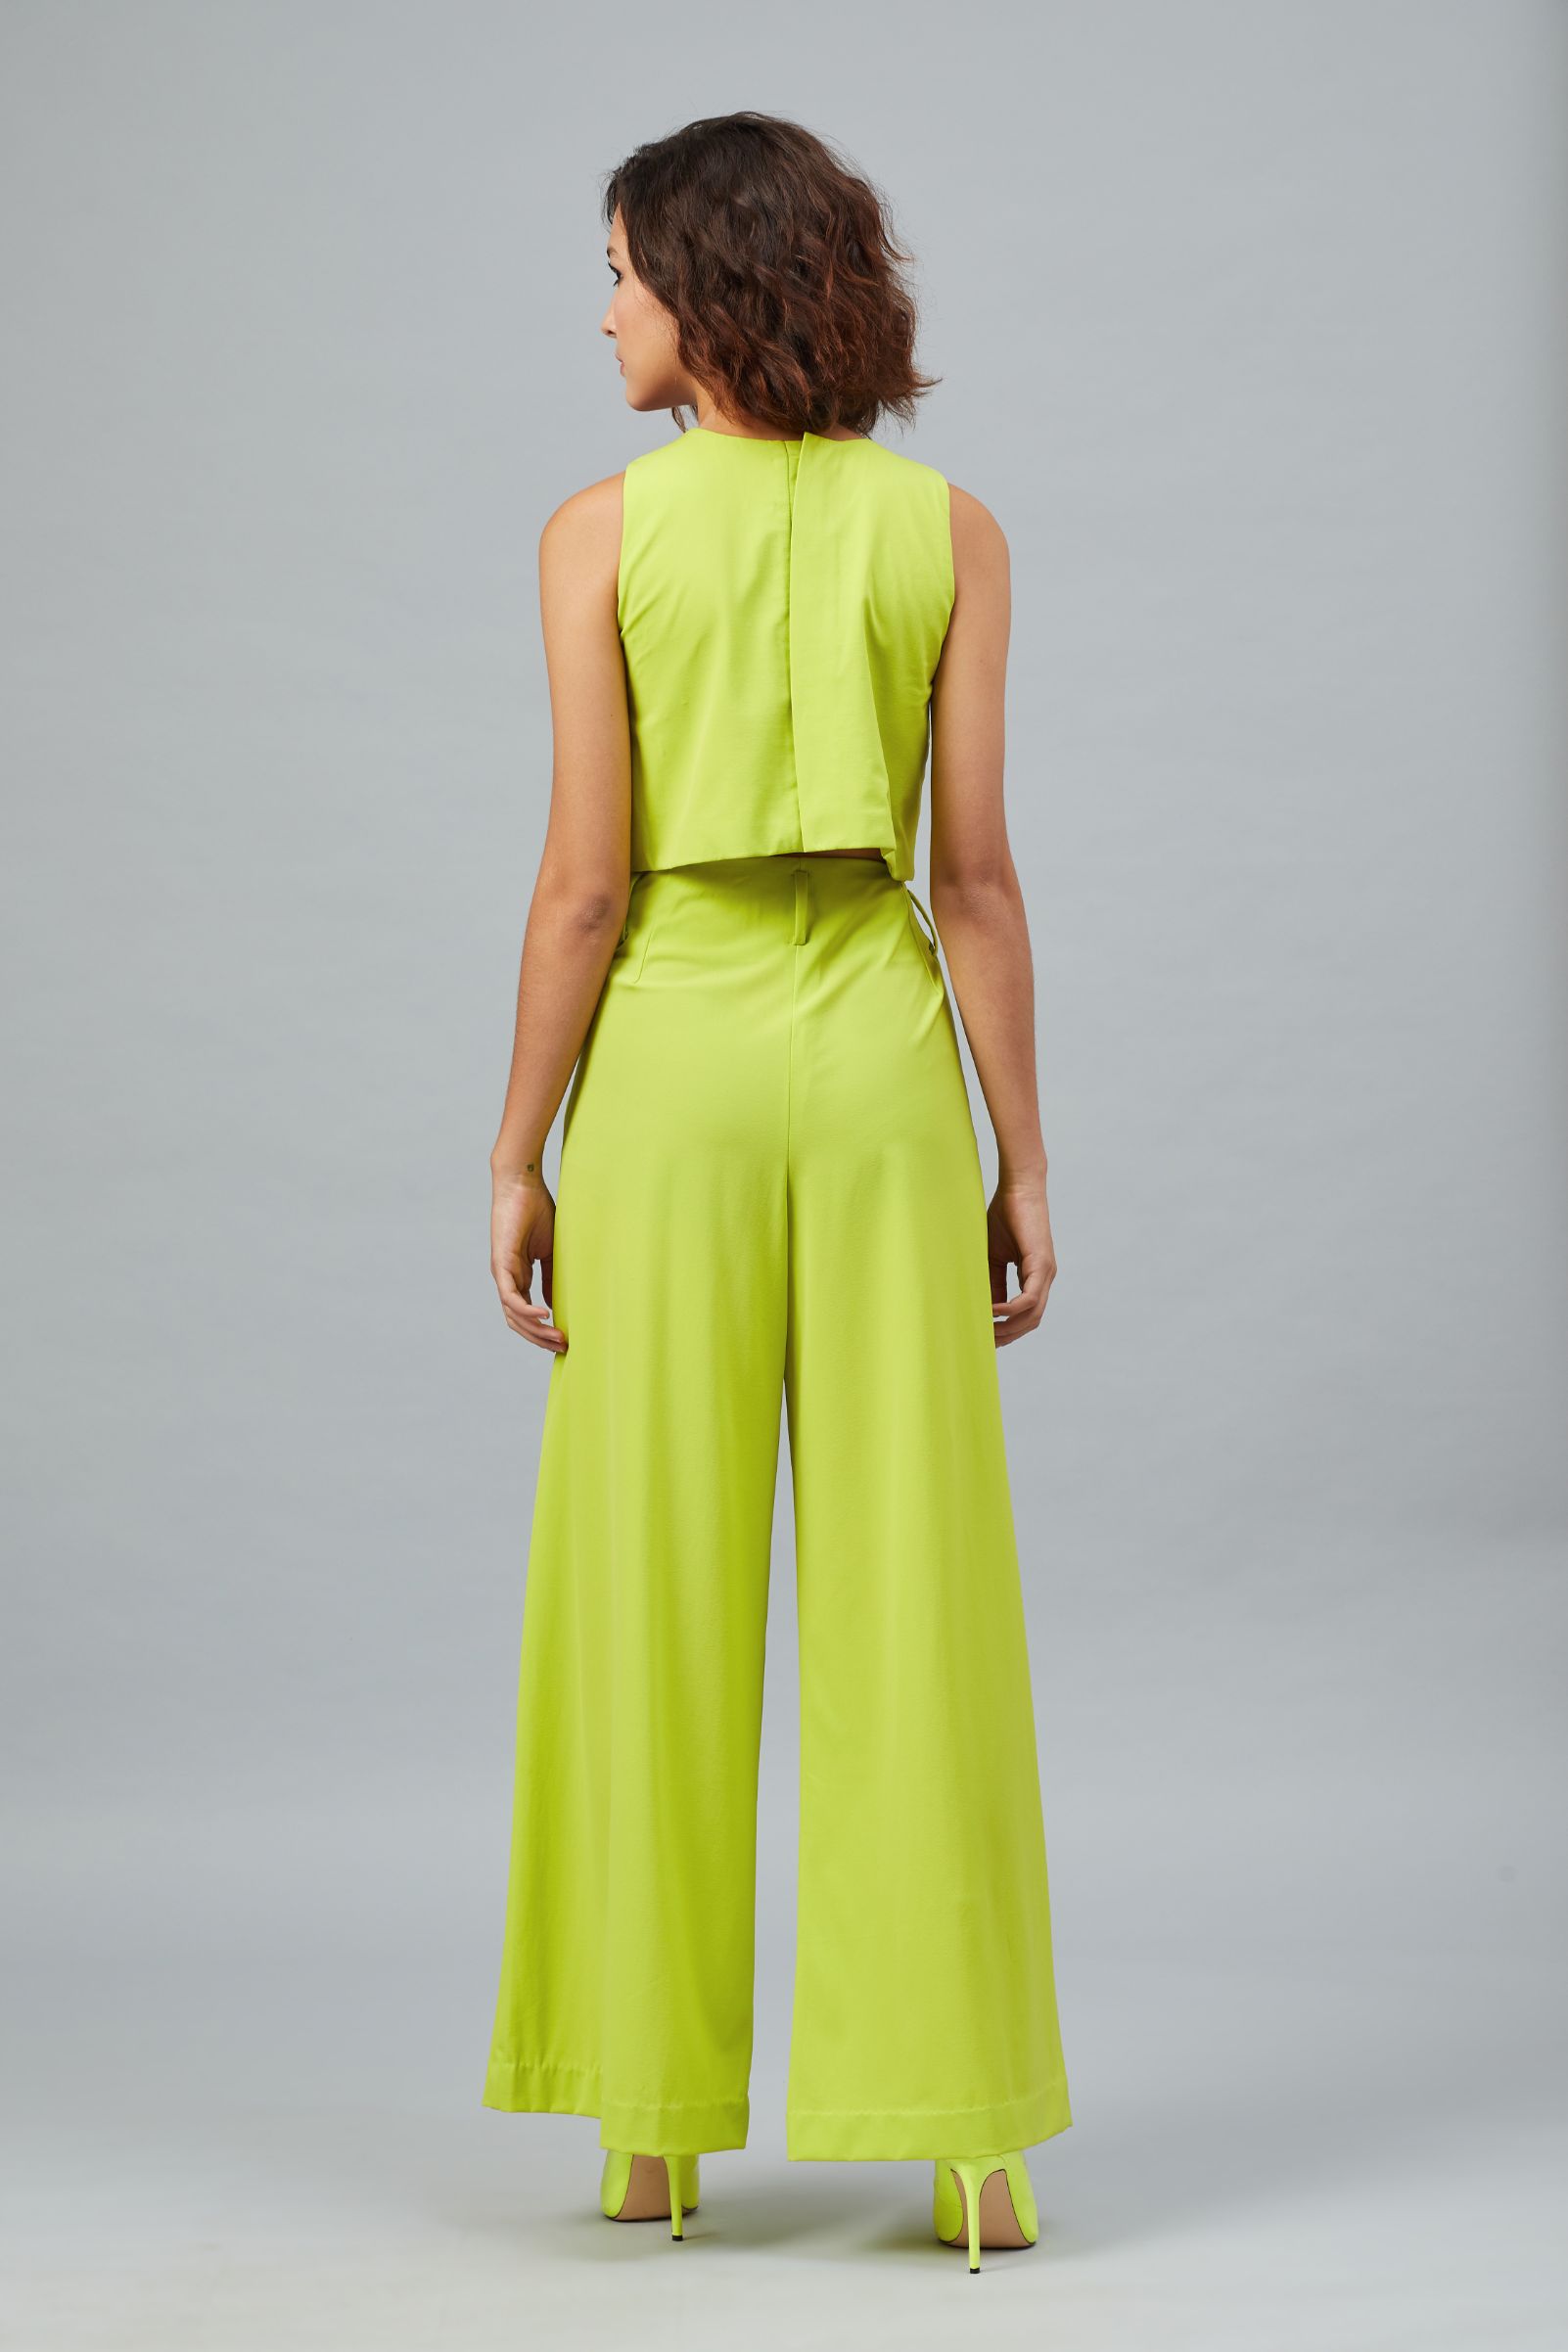 S.H. RAZA MULTI COLOURED CROPPED TOP WITH PARROT GREEN TROUSERS